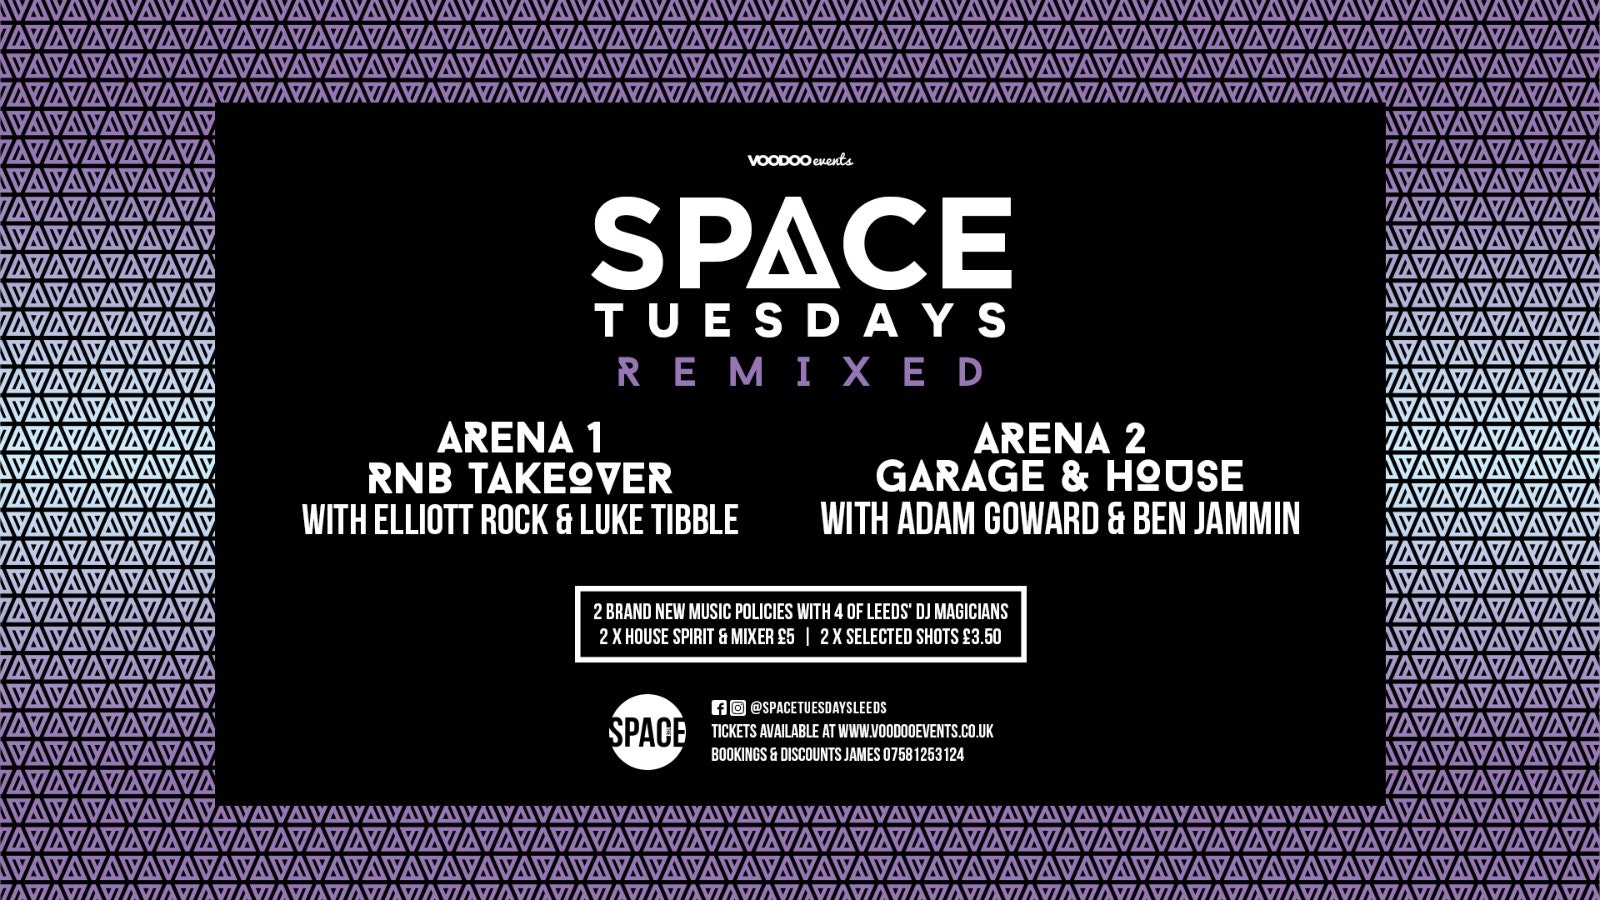 Space Tuesdays Remixed : END OF TERM PARTY PART 2